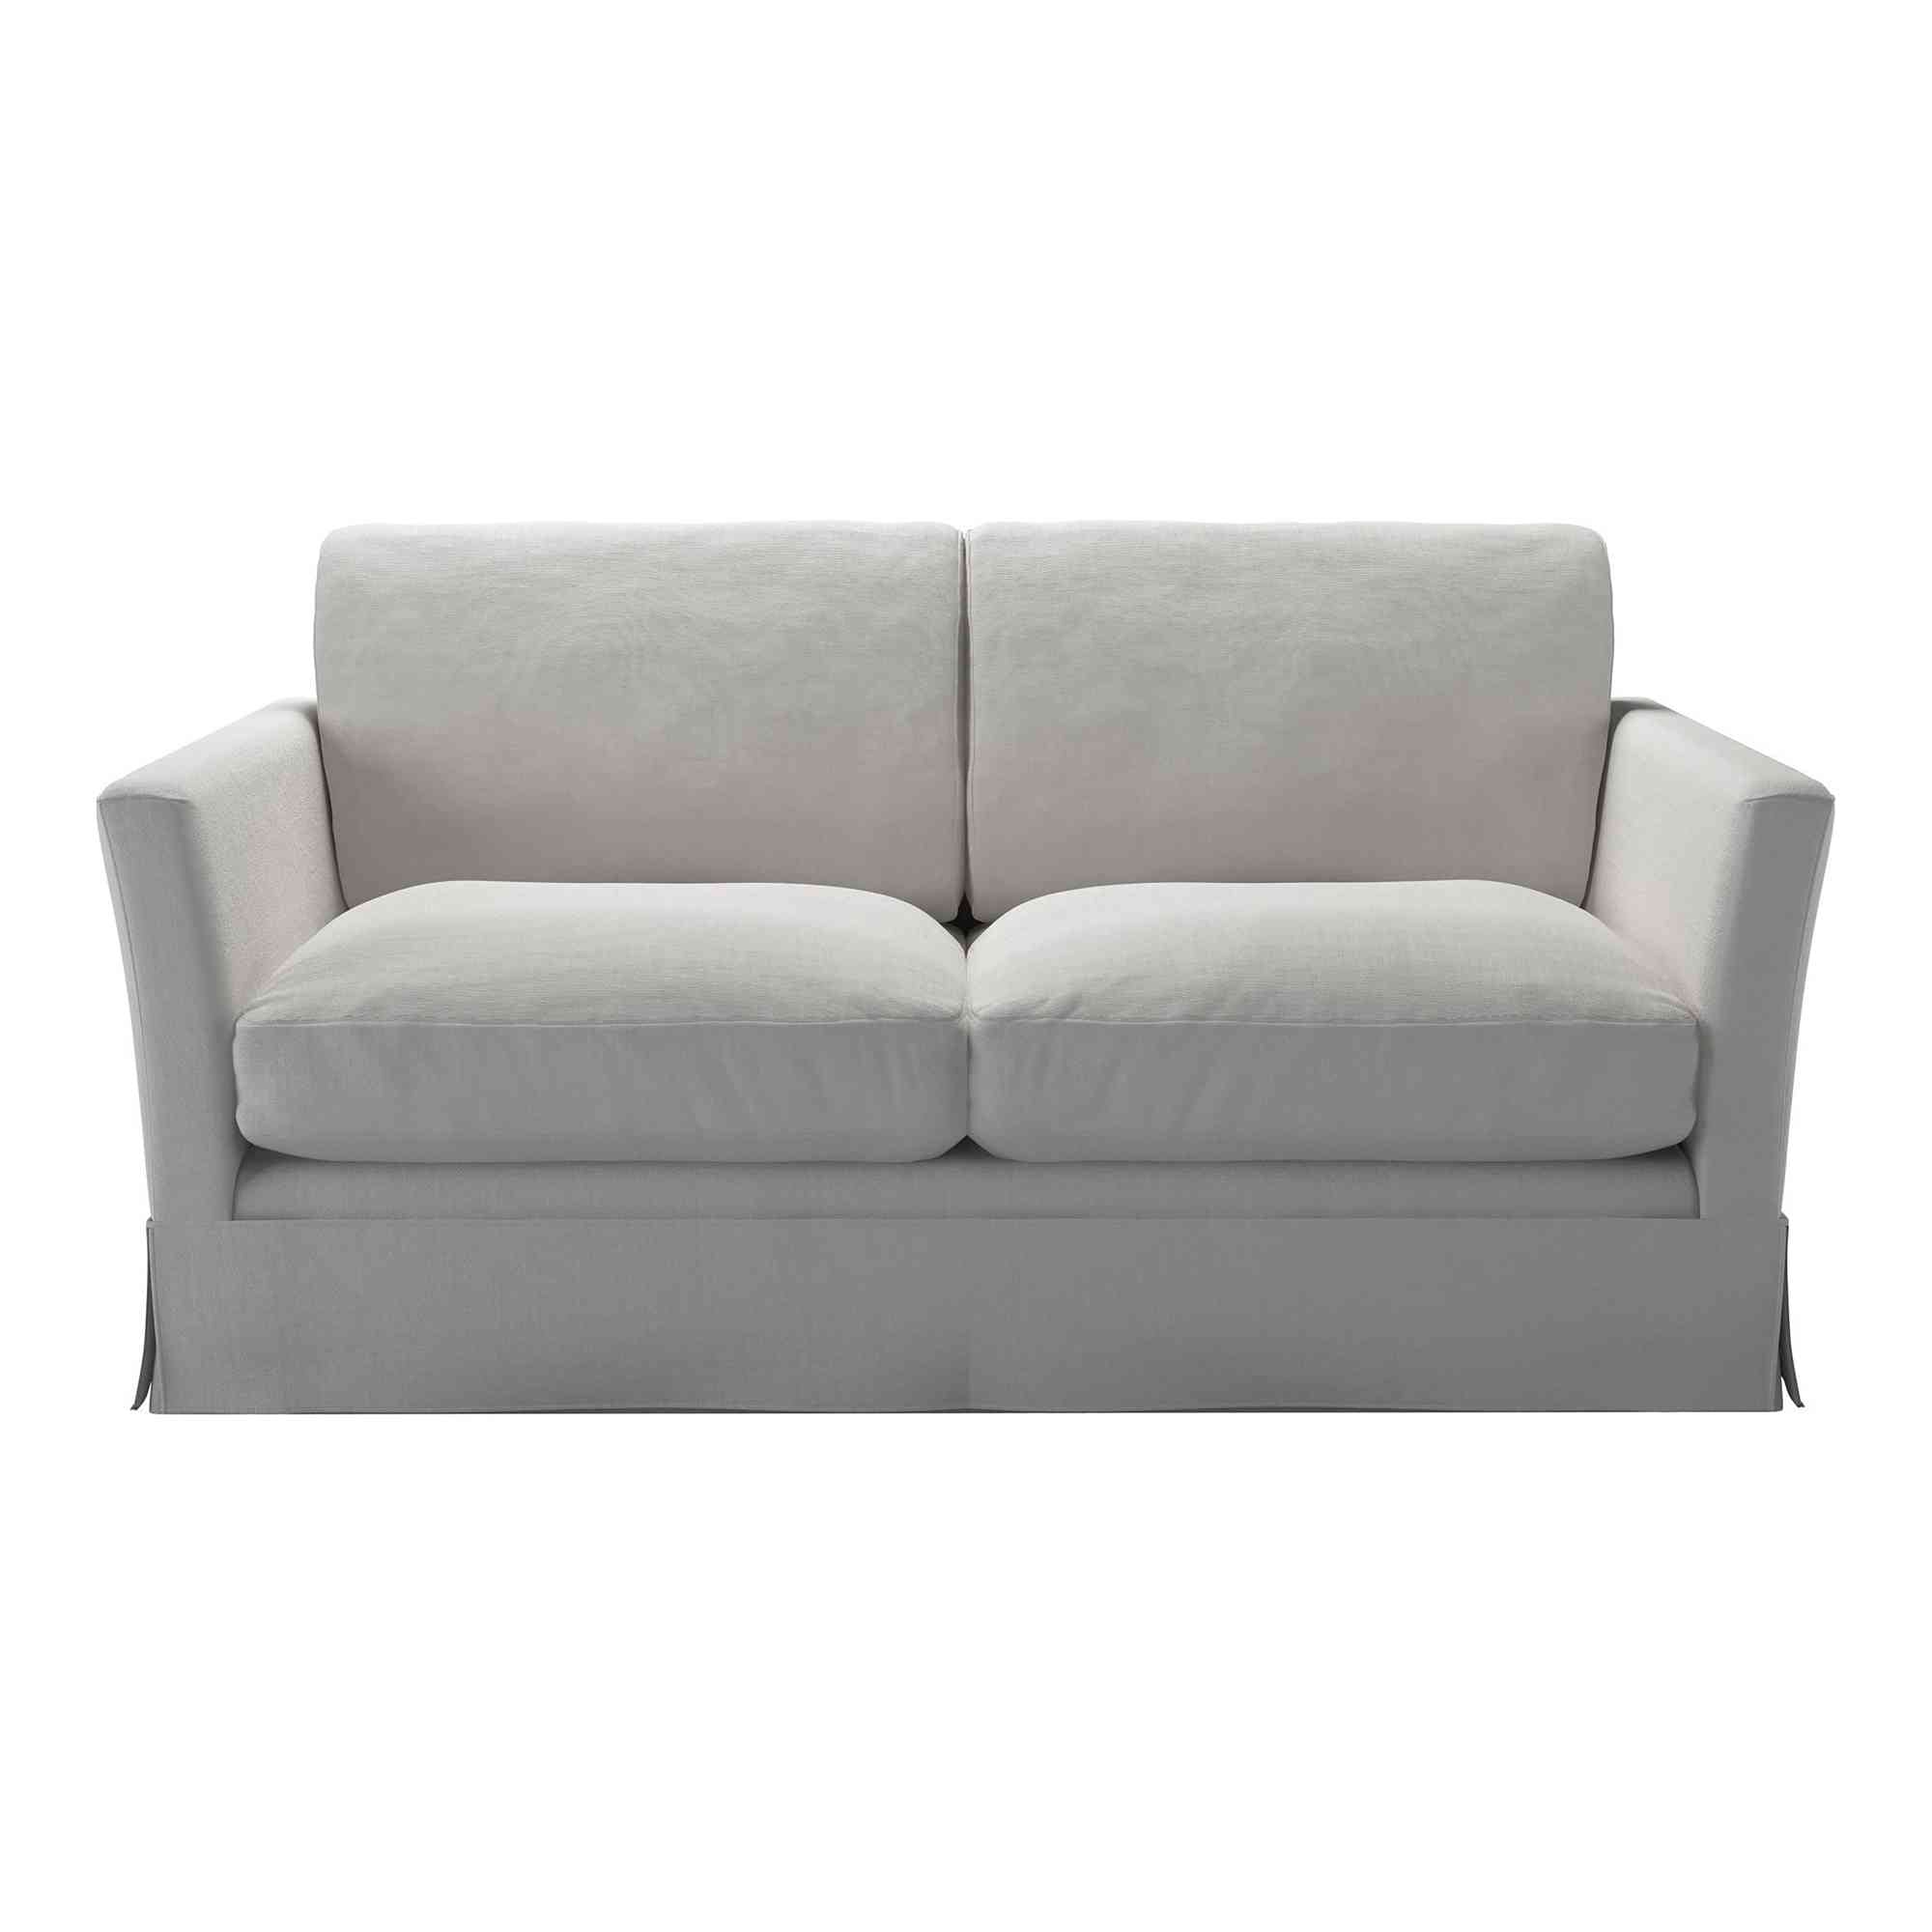 Otto Alabaster Brushed Linen Cotton Sofa - 2 Seater